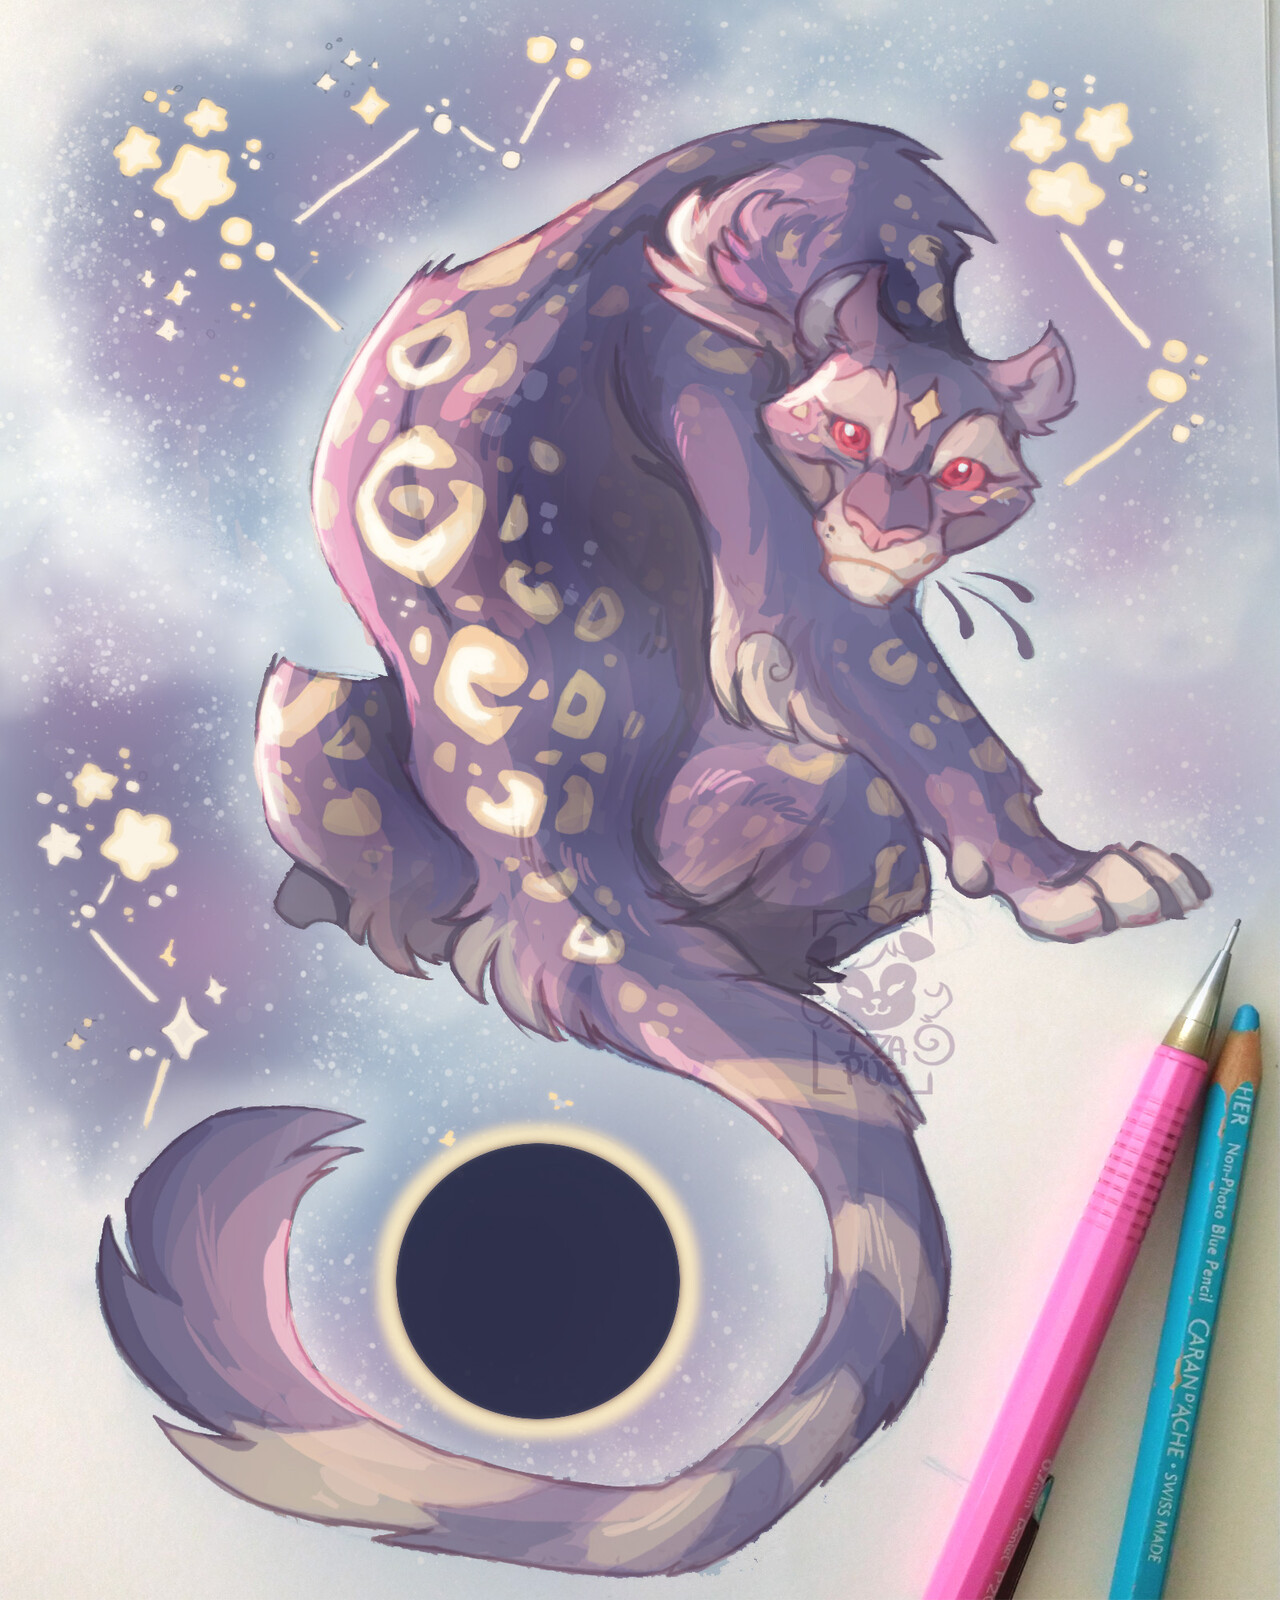 Charia - The Celestial Jaguar ×
Sharia is an evil spirit belonging to Tupi-Guarani mythology.
The Tupis report how solar and lunar eclipses occur because this spirit is. In the meantime, I really can't draw evil creatures ... so he's not that evil.